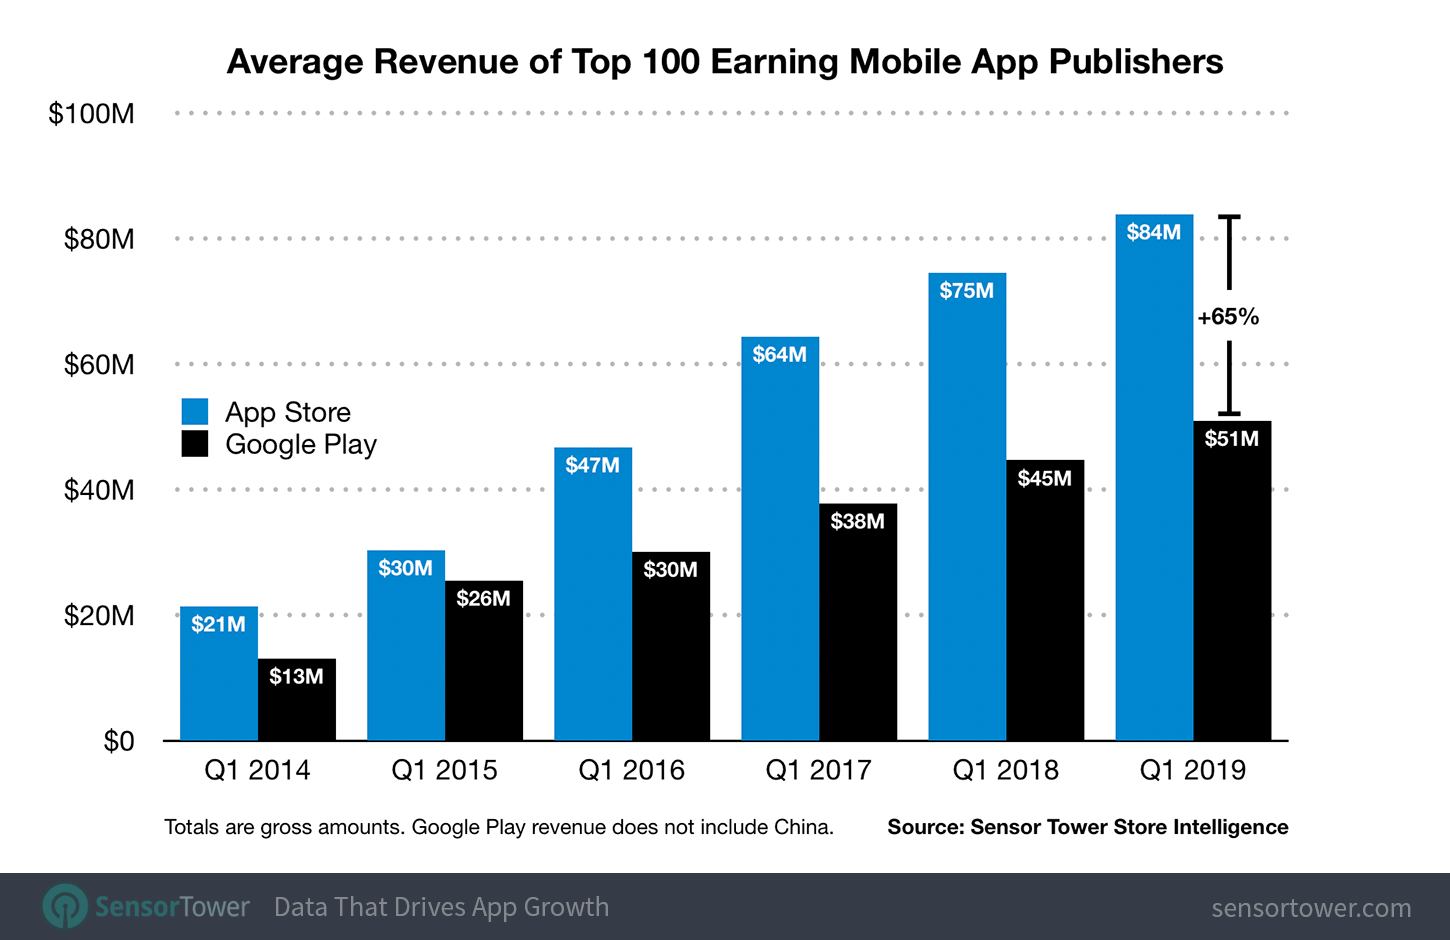 Apple's Top App Store Publishers Are Earning 64 Percent More Than Google Play's on Average